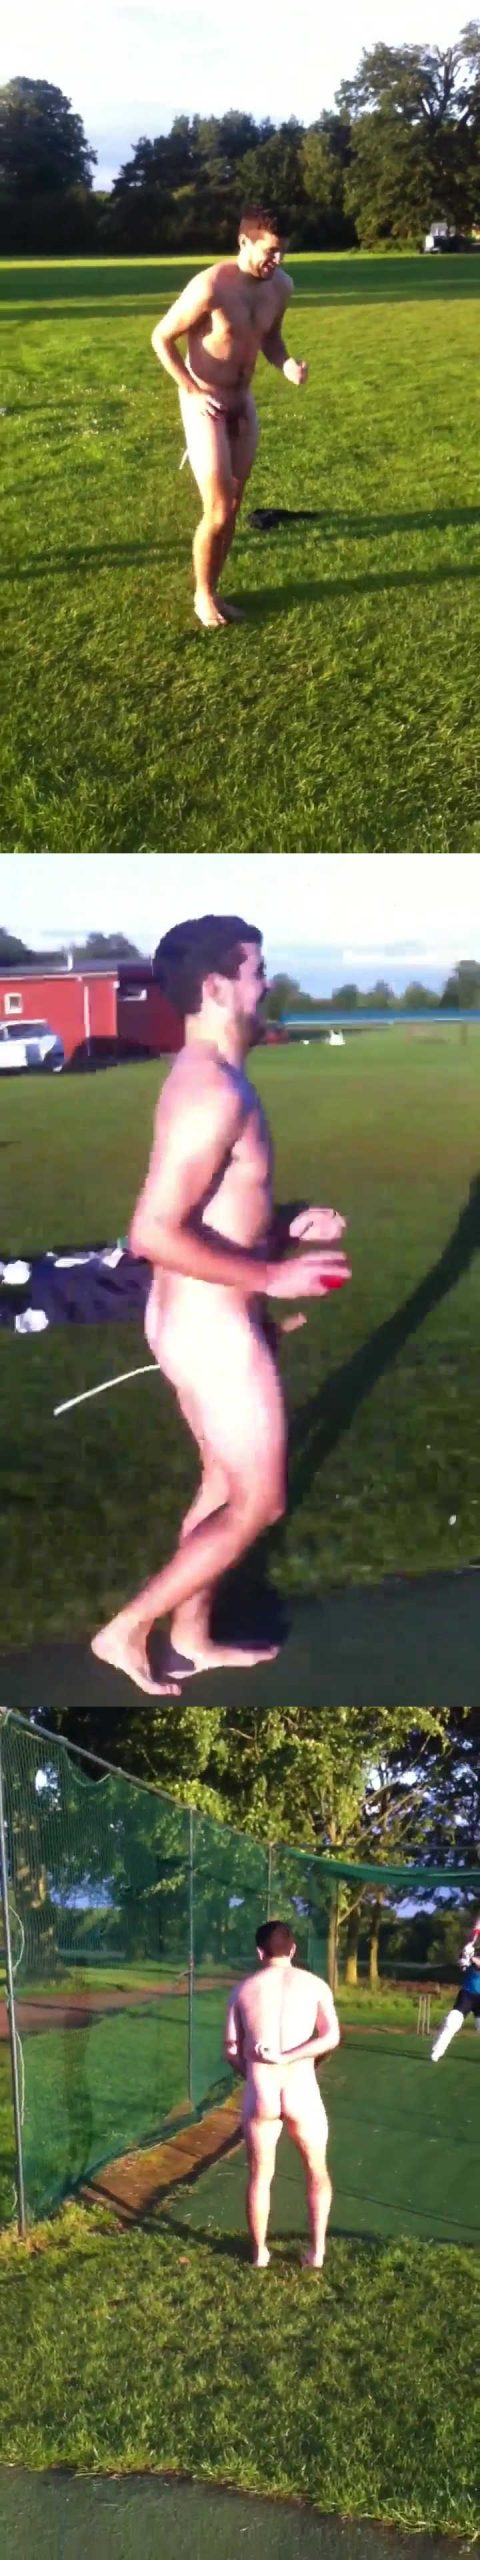 tennis player naked in public